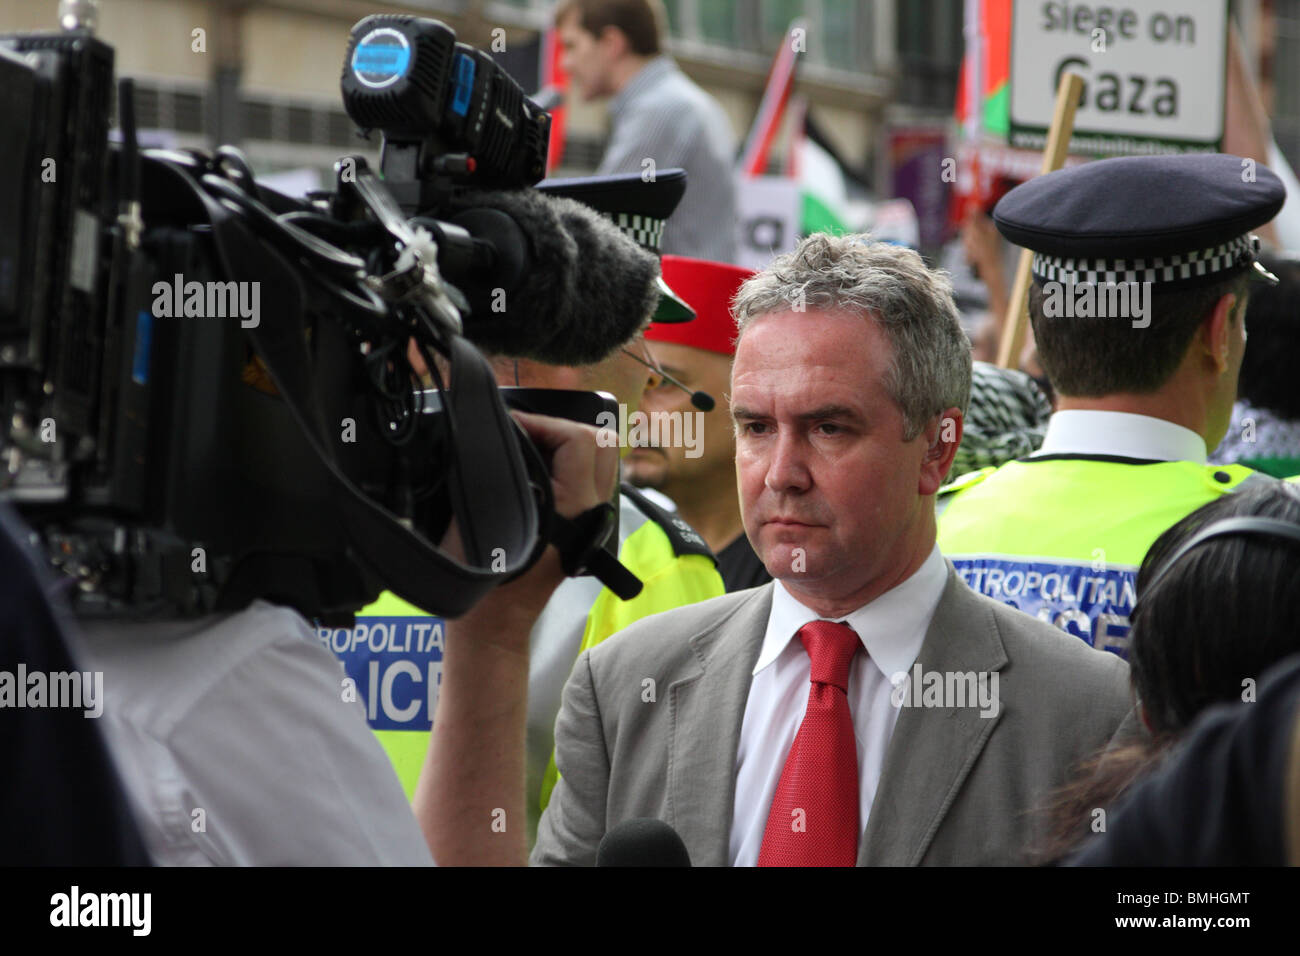 A TV News Reporter broadcasting at the 'Freedom for Palestine' demonstration outside the Israeli Embassy London, England, U.K. Stock Photo